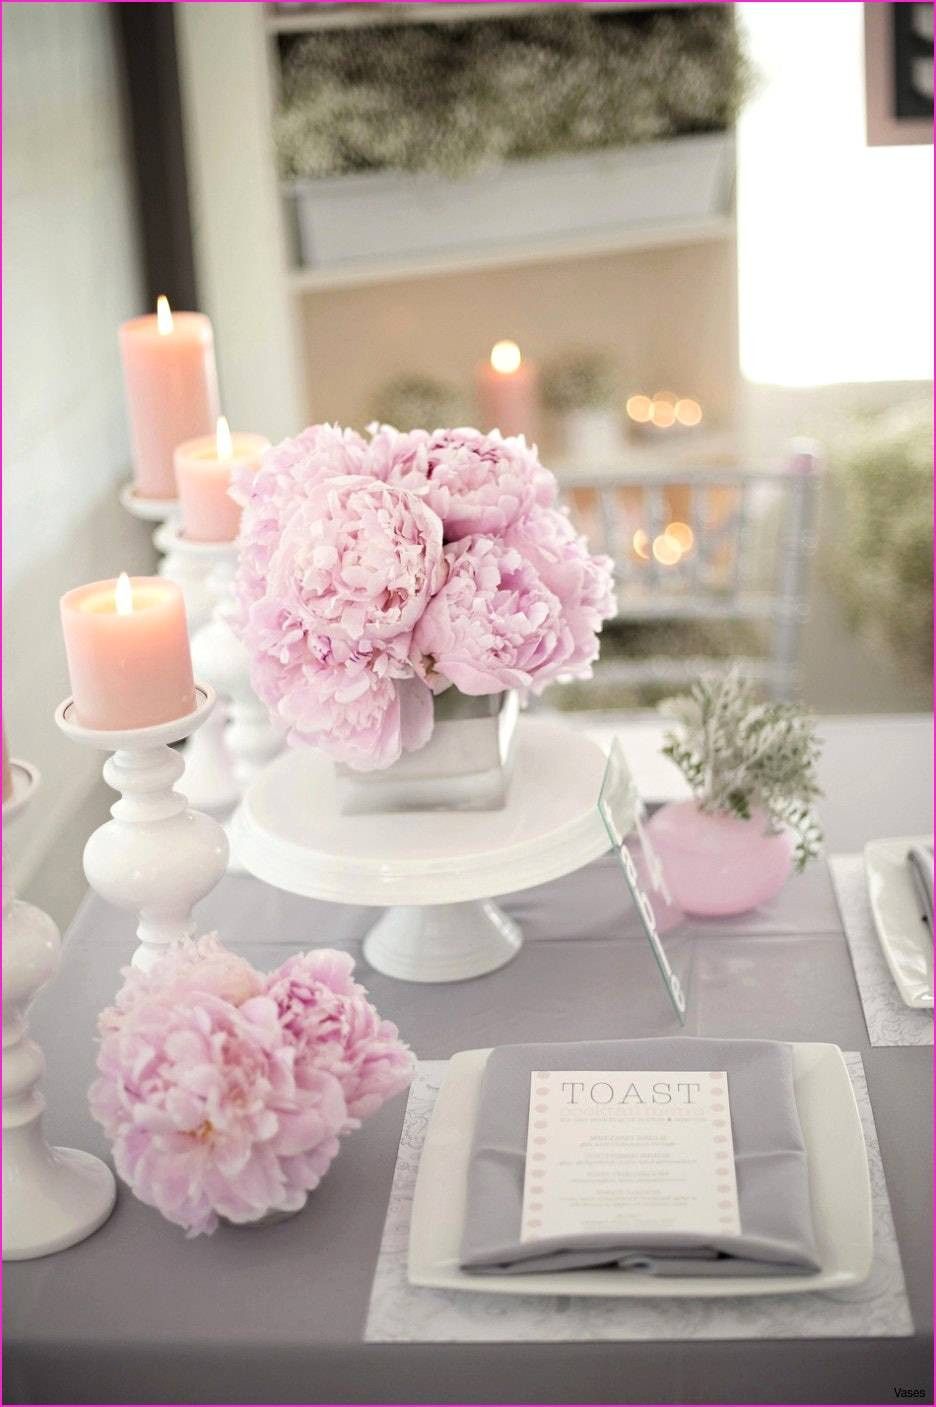 16 Stunning Small Cylinder Vases Bulk 2024 free download small cylinder vases bulk of wedding centerpieces with pictures simple bulk wedding decorations inside wedding centerpieces with pictures simple bulk wedding decorations dsc h vases square c